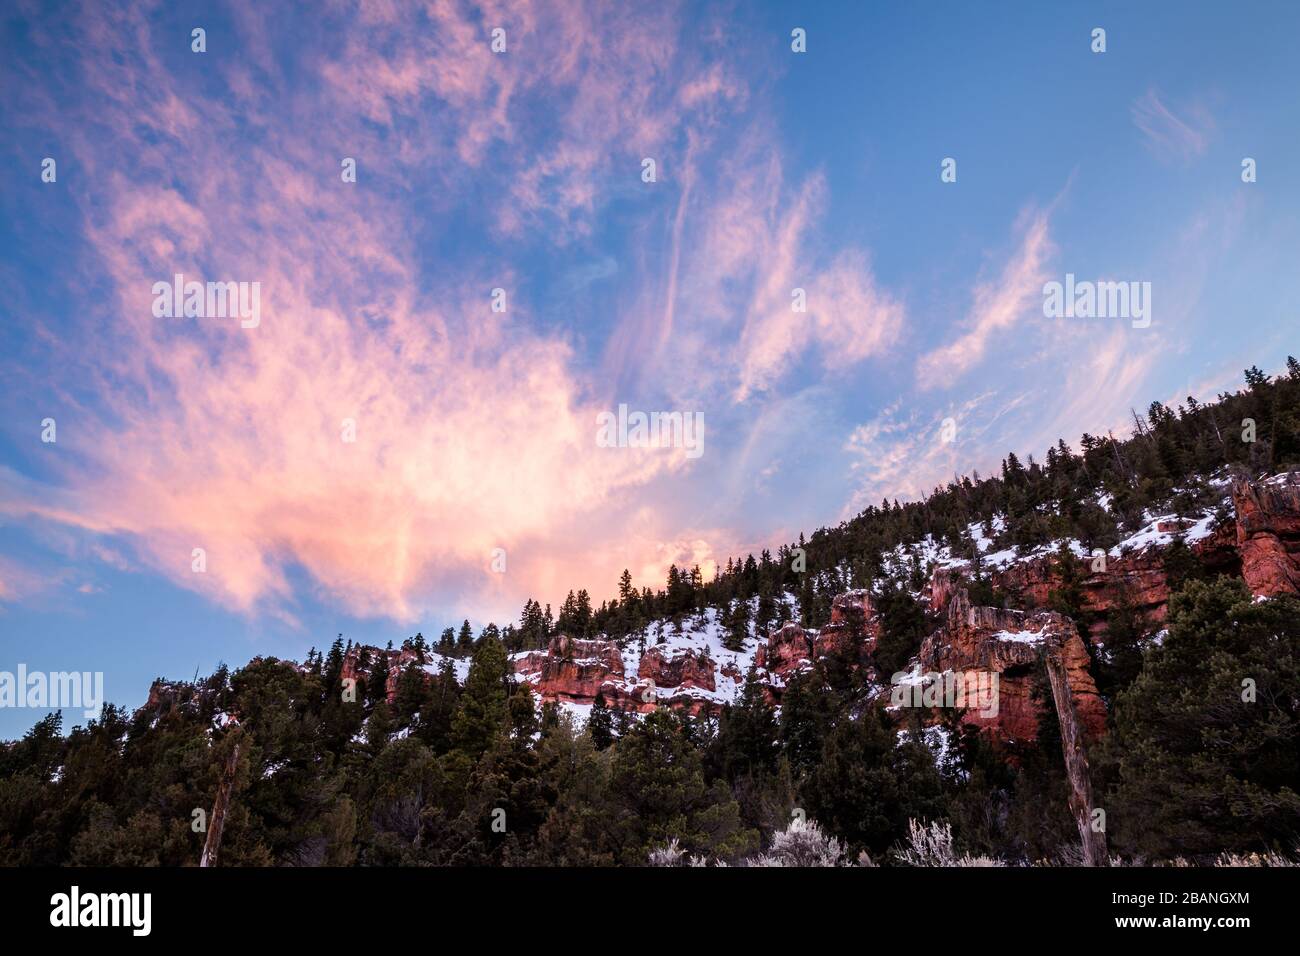 In a remote Utah desert canyon, red cliffs are covered in snow in winter. Overhead whispy clouds are lit up in pink during sunset. Stock Photo